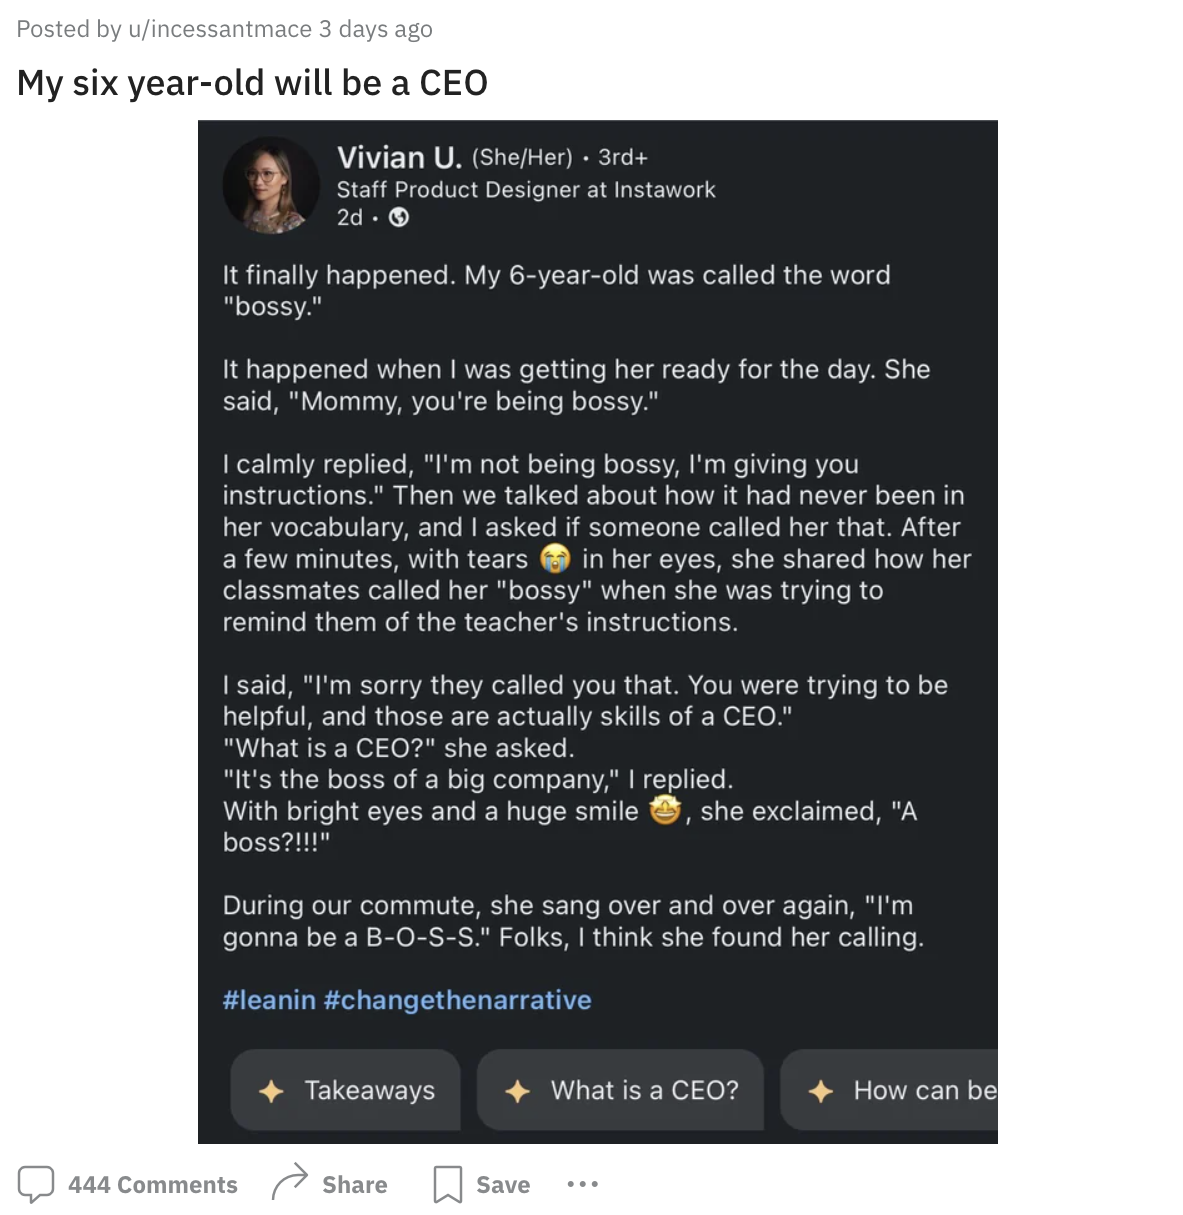 screenshot - Posted by uincessantmace 3 days ago My six yearold will be a Ceo Vivian U. SheHer 3rd Staff Product Designer at Instawork 2d> It finally happened. My 6yearold was called the word "bossy." It happened when I was getting her ready for the day. 